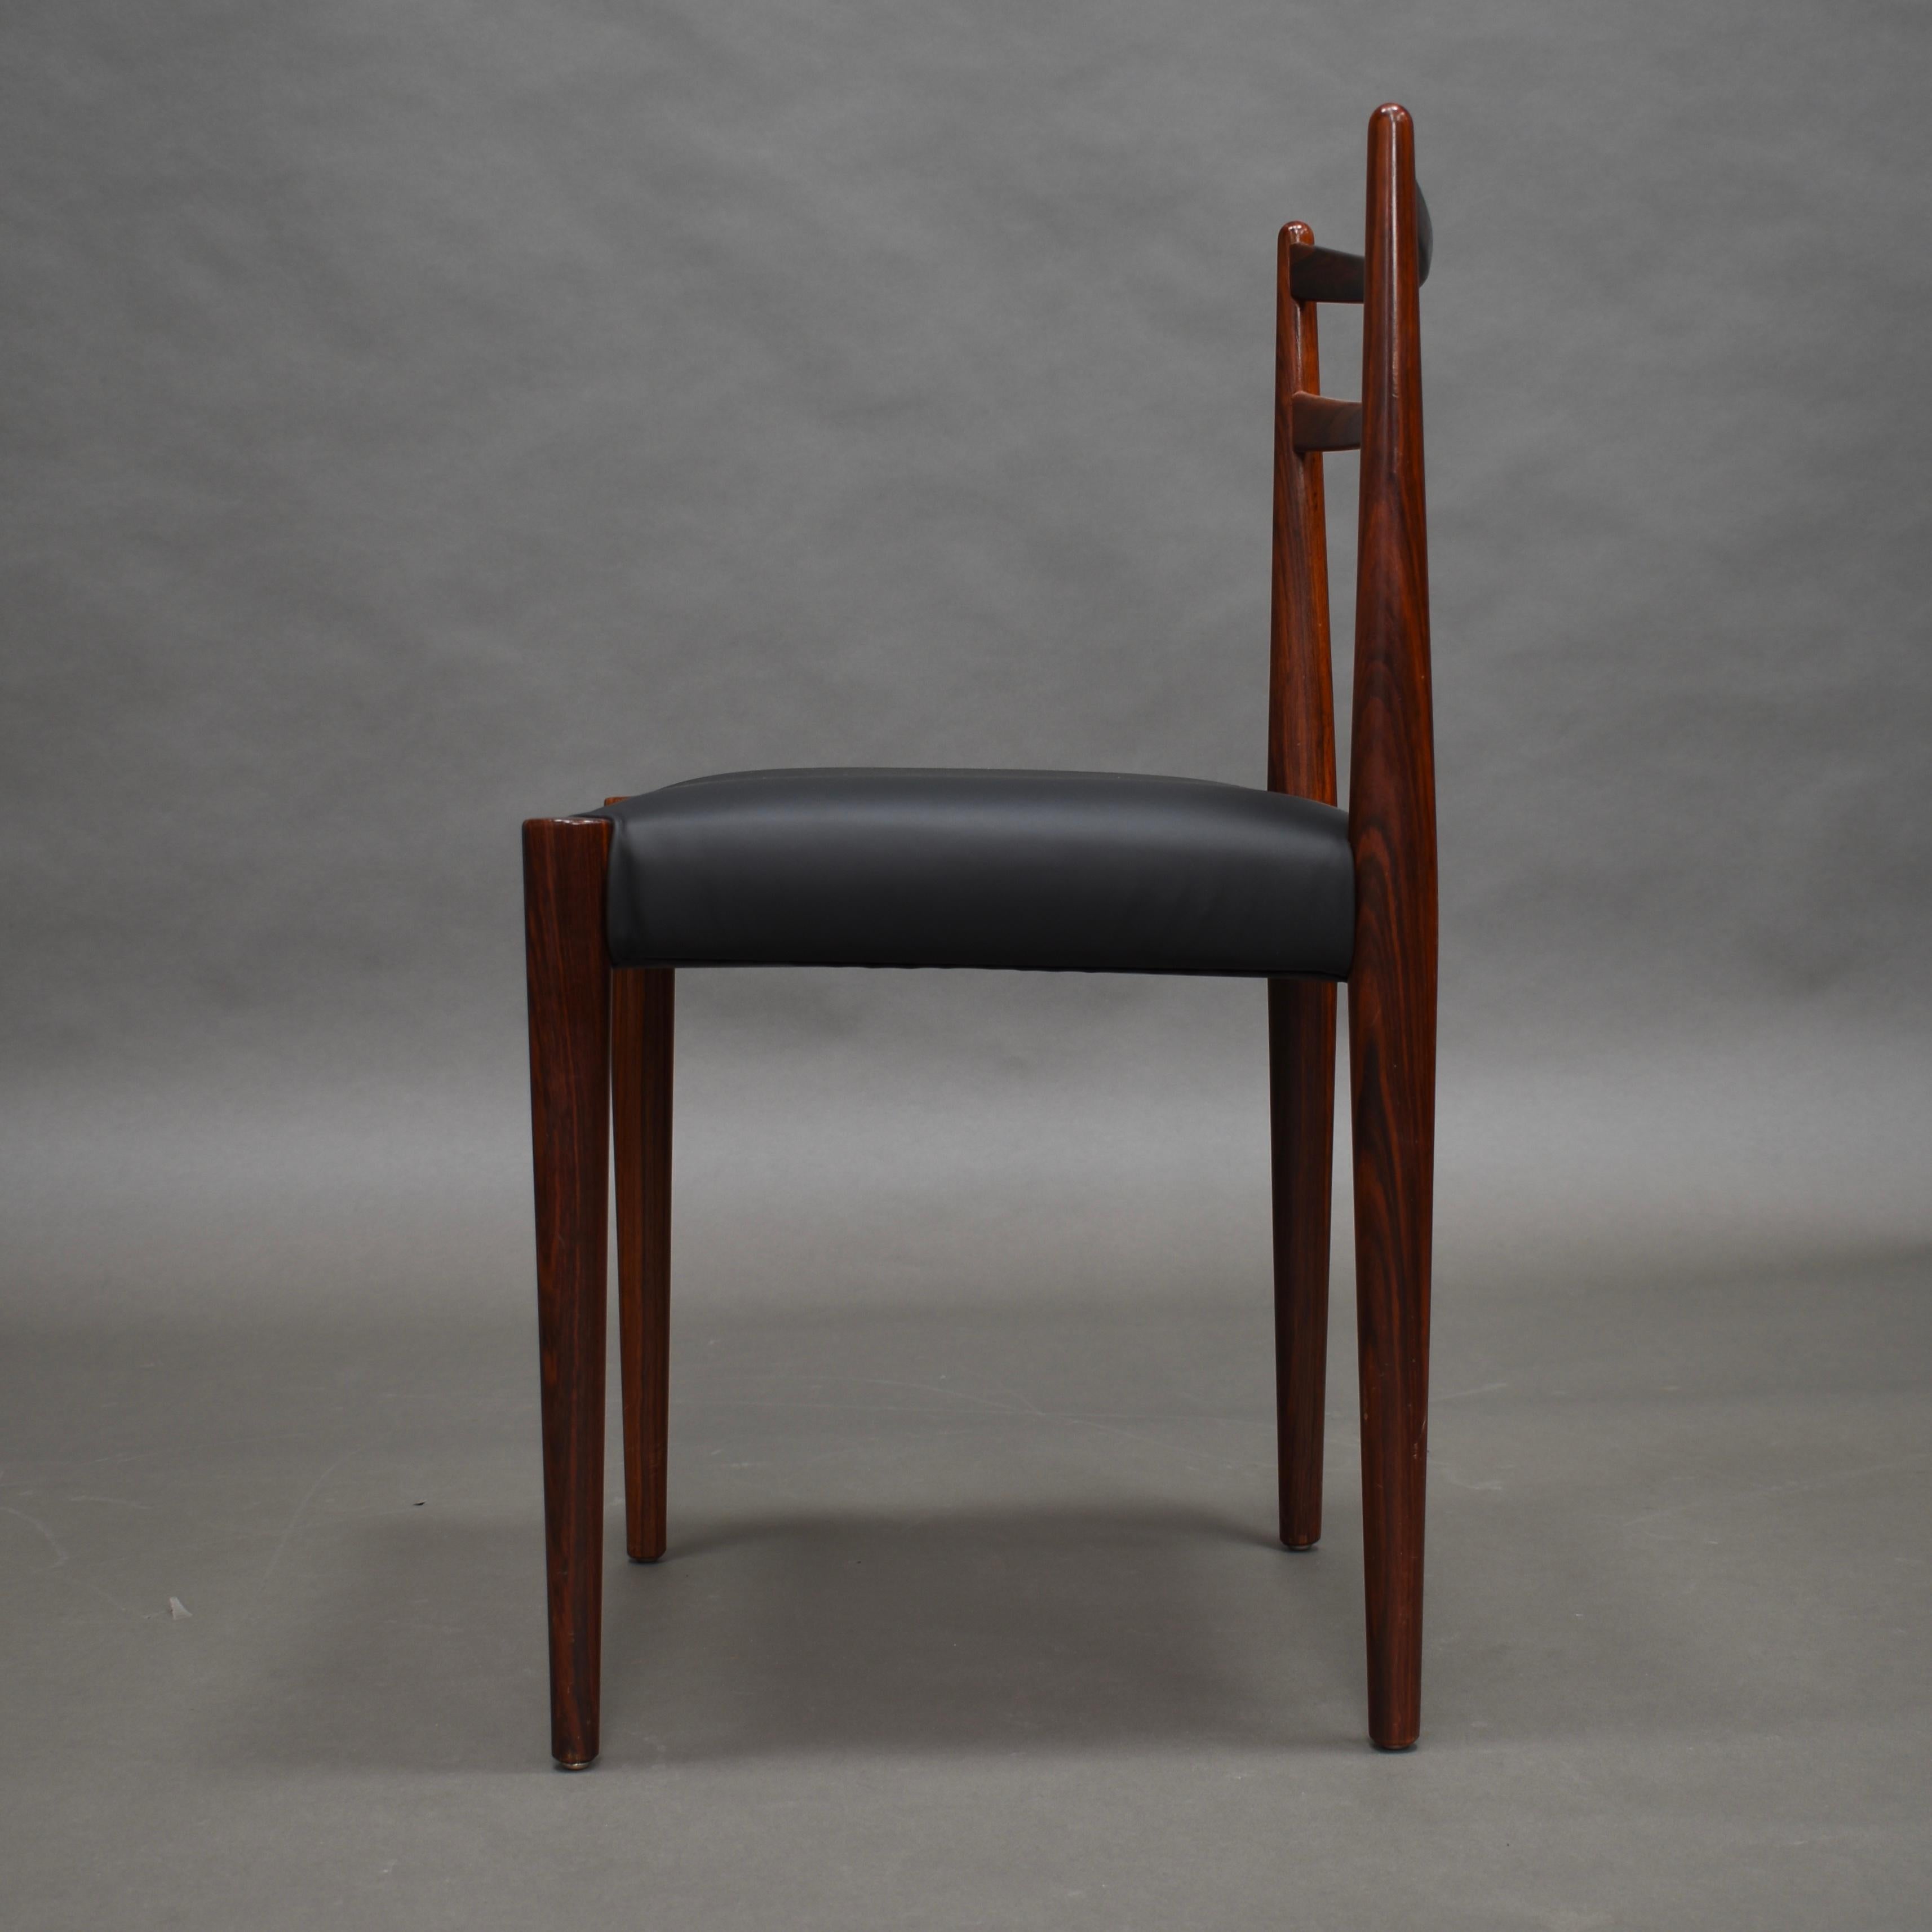 Danish Brazilian Rosewood Dining Chairs in New Black Leather, Denmark, 1950s 3